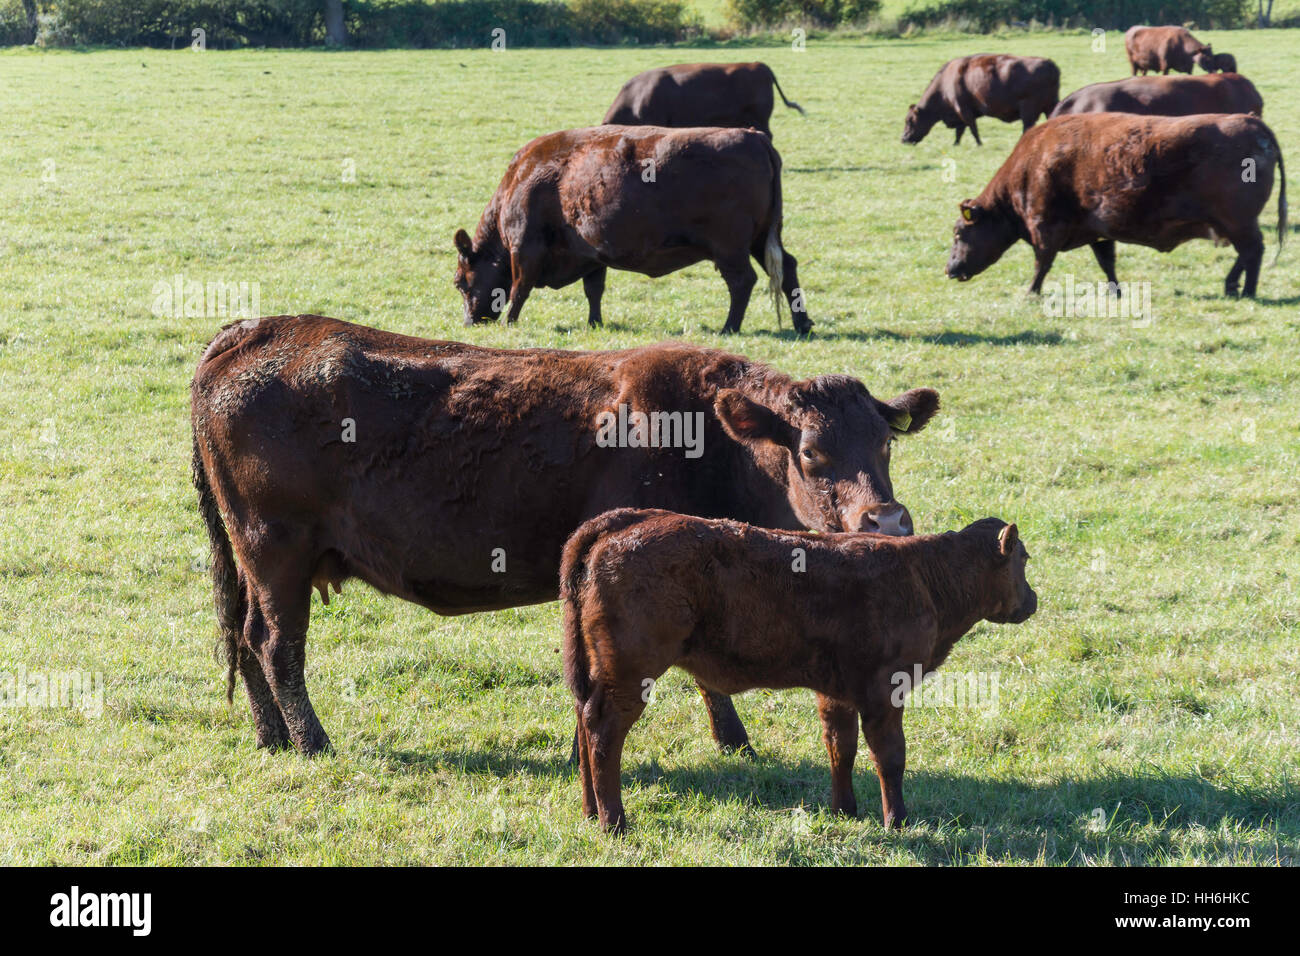 Sussex breed cows in field at Runnymede by River Thames, Surrey, England, United Kingdom Stock Photo